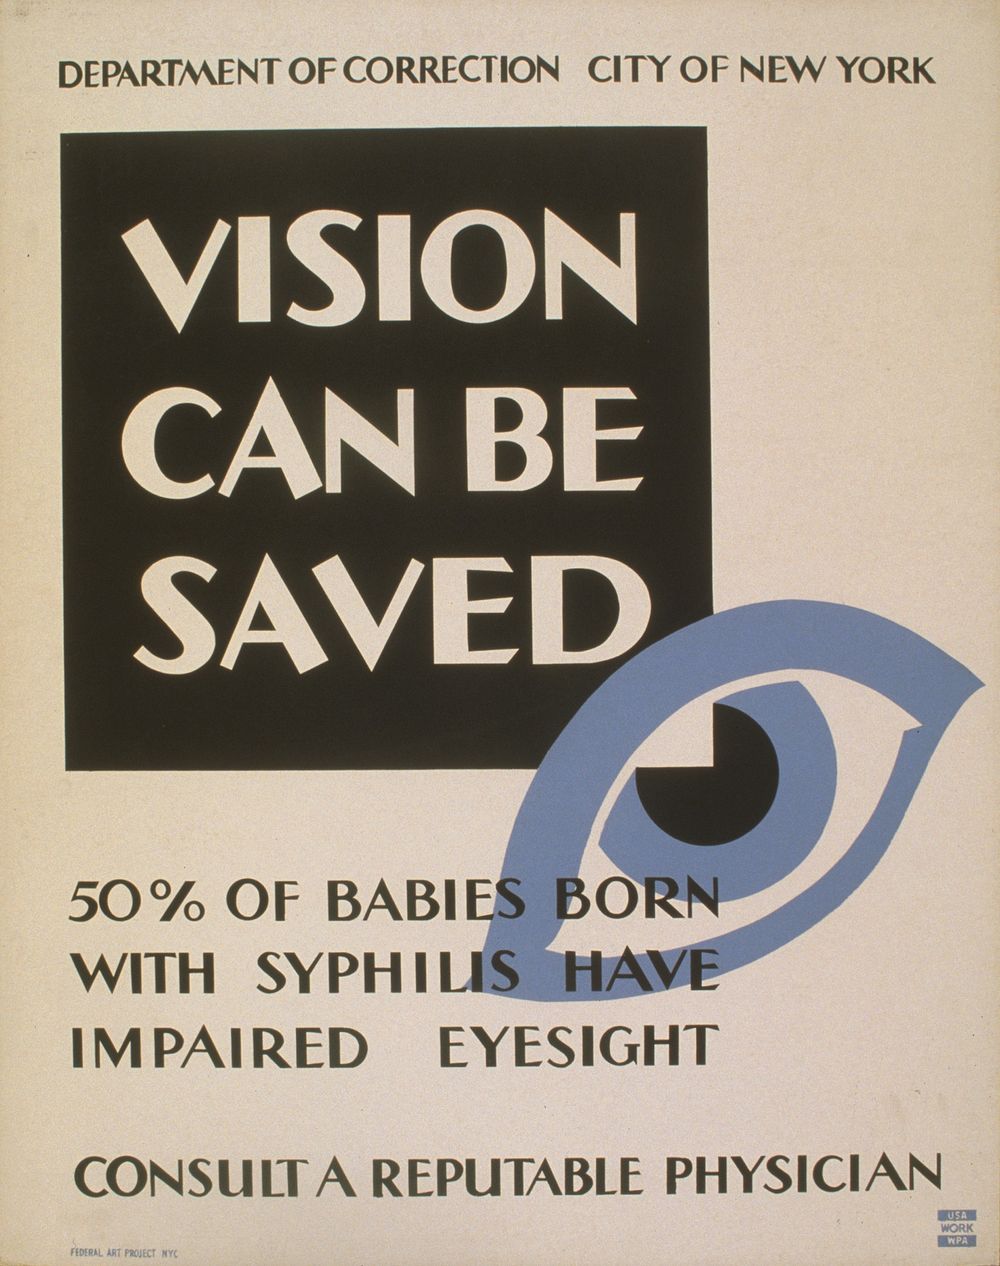 Vision can be saved 50% of babies born with syphilis have impaired eyesight : Consult a reputable physician.